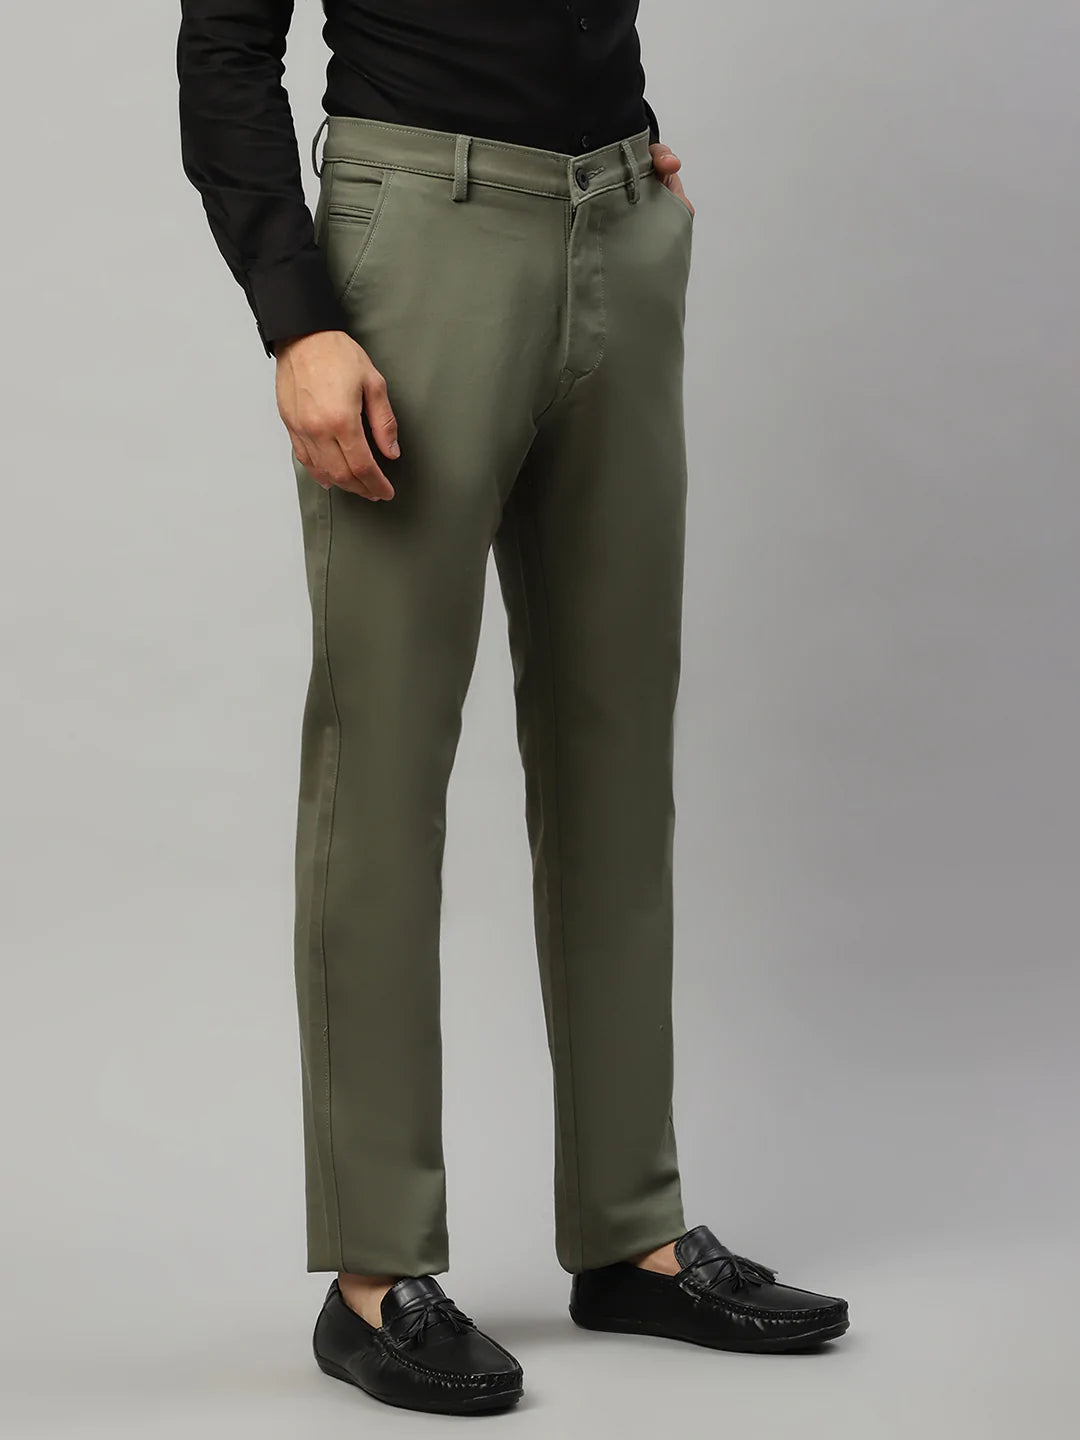 Green & Olive Pants | Pants outfit men, Famous outfits, Mens outfits